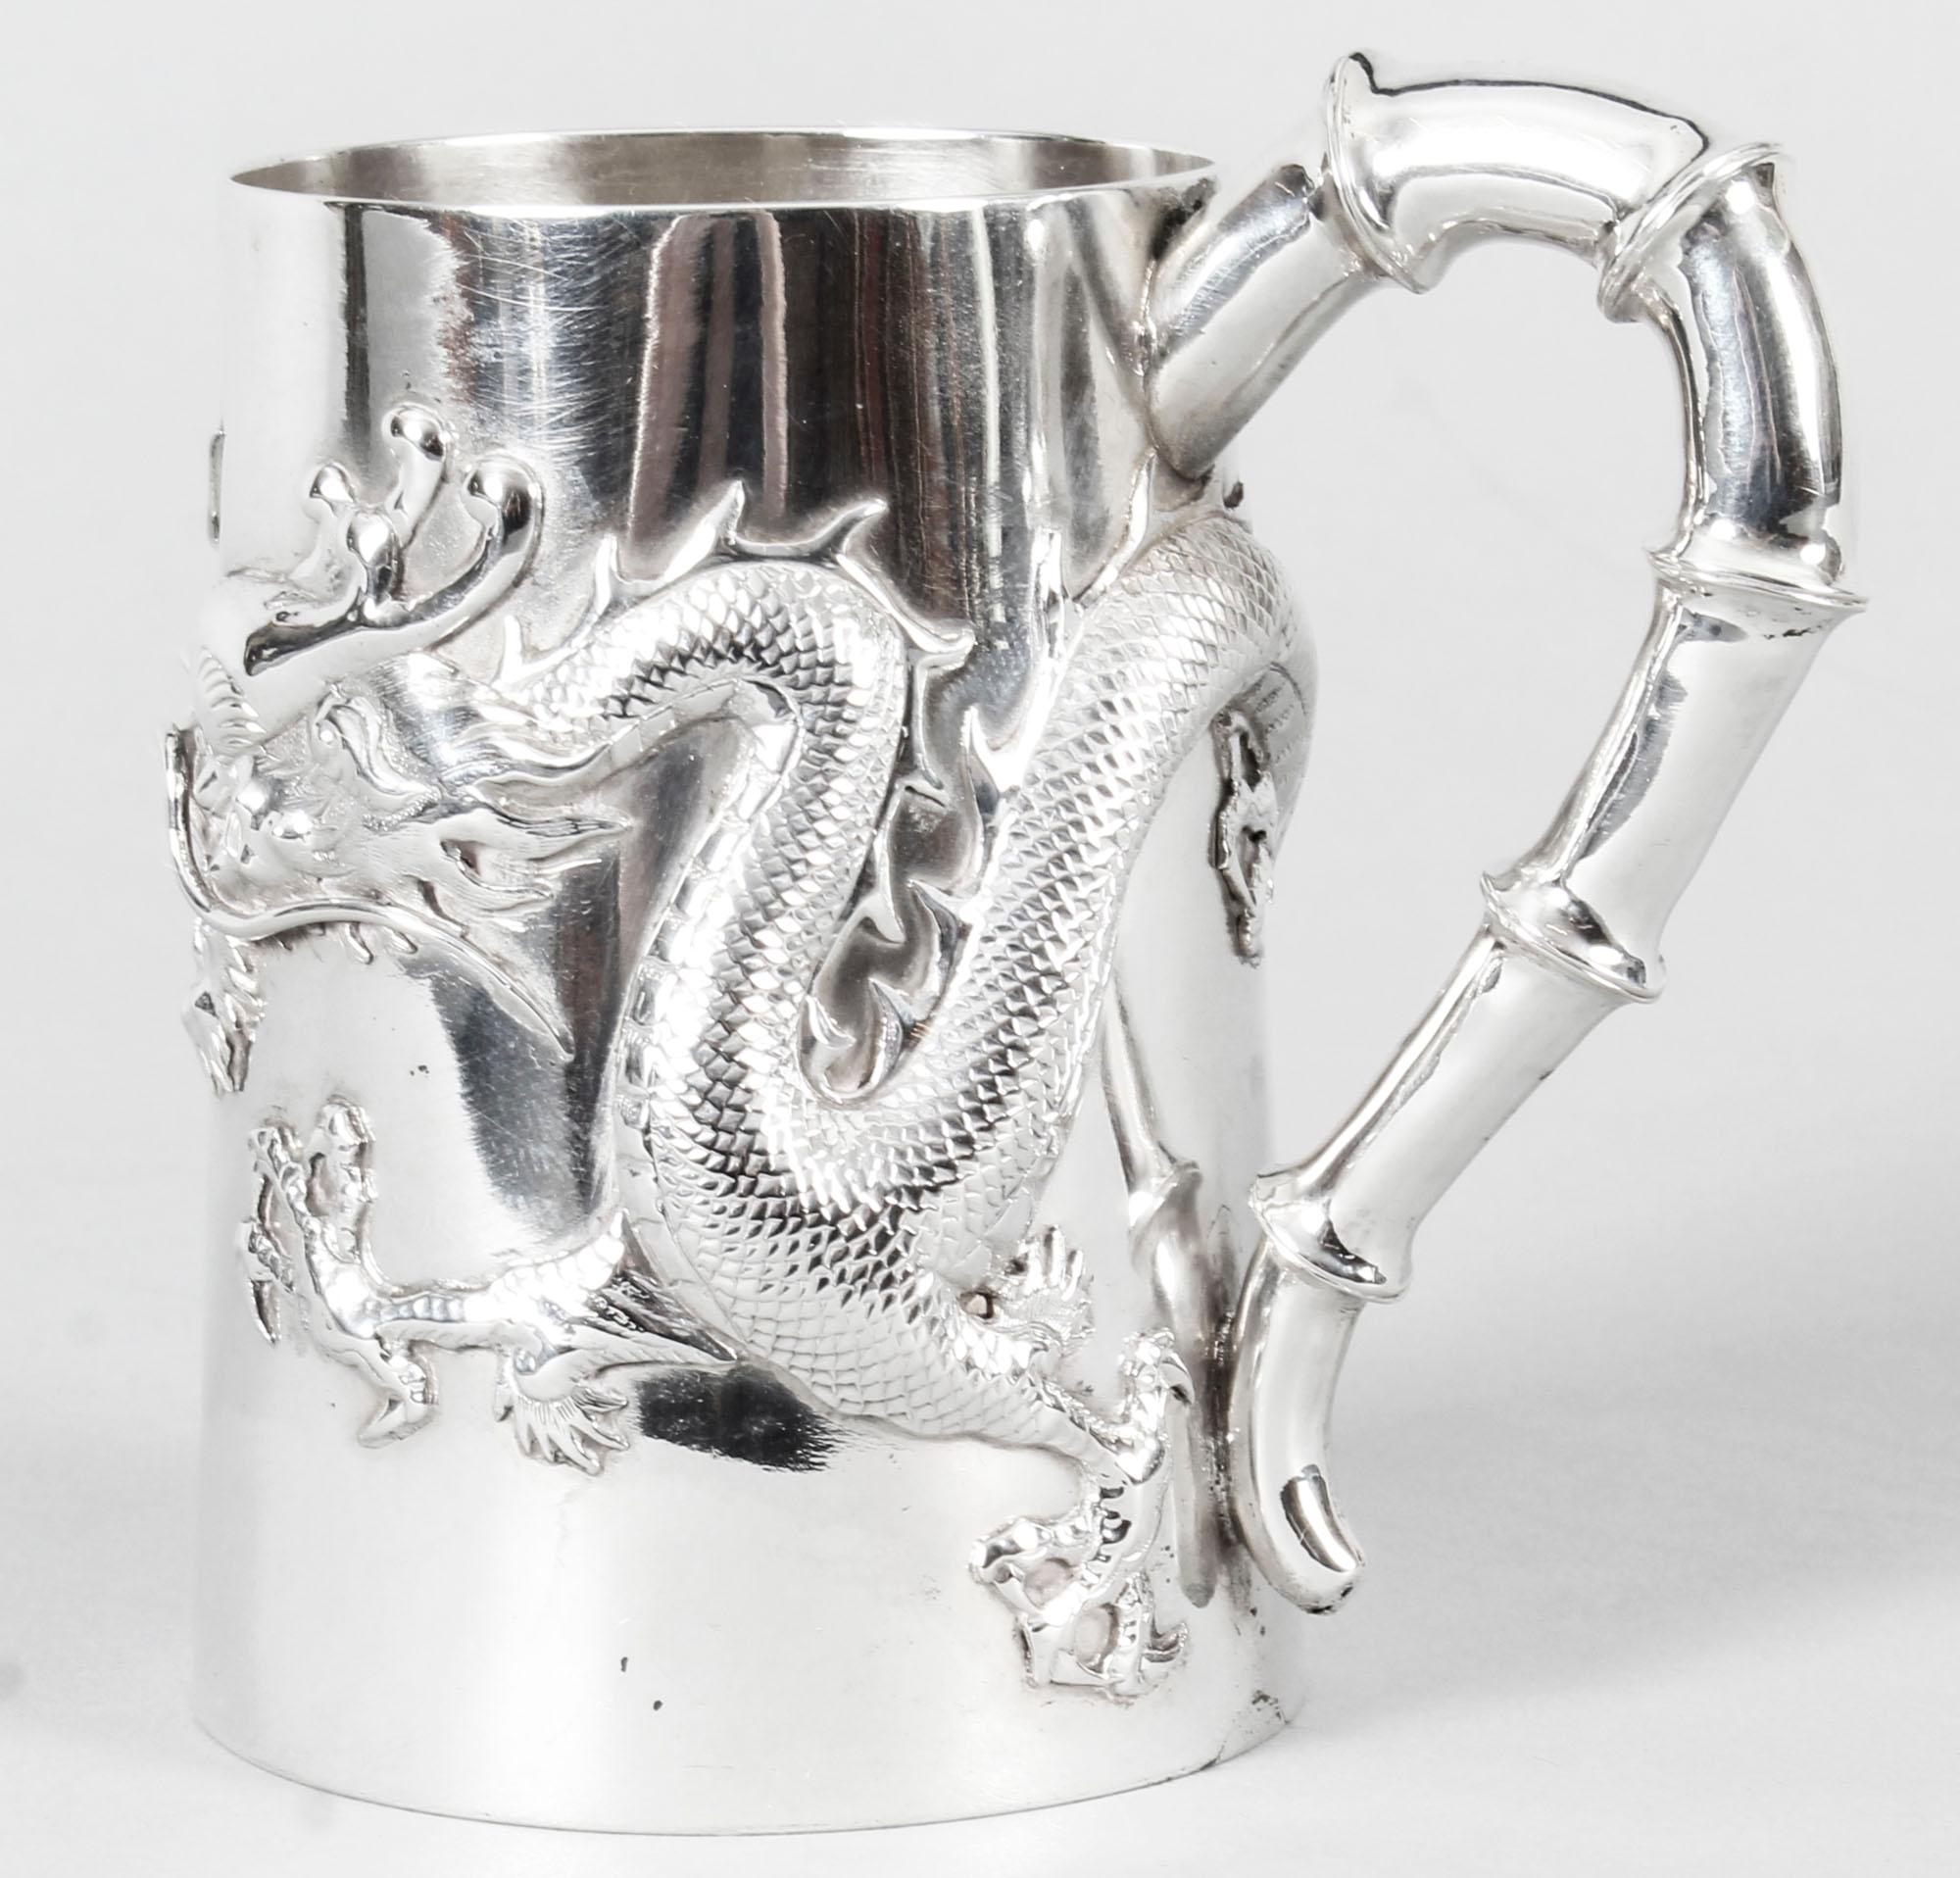 This is a magnificent antique Chinese export solid silver mug, with hallmarks for Hung Chong, Canton & Shanghai, circa 1900 in date.

This stunning silver mug has a slender tapering cylindrical body which is masterfully chased with the legendary